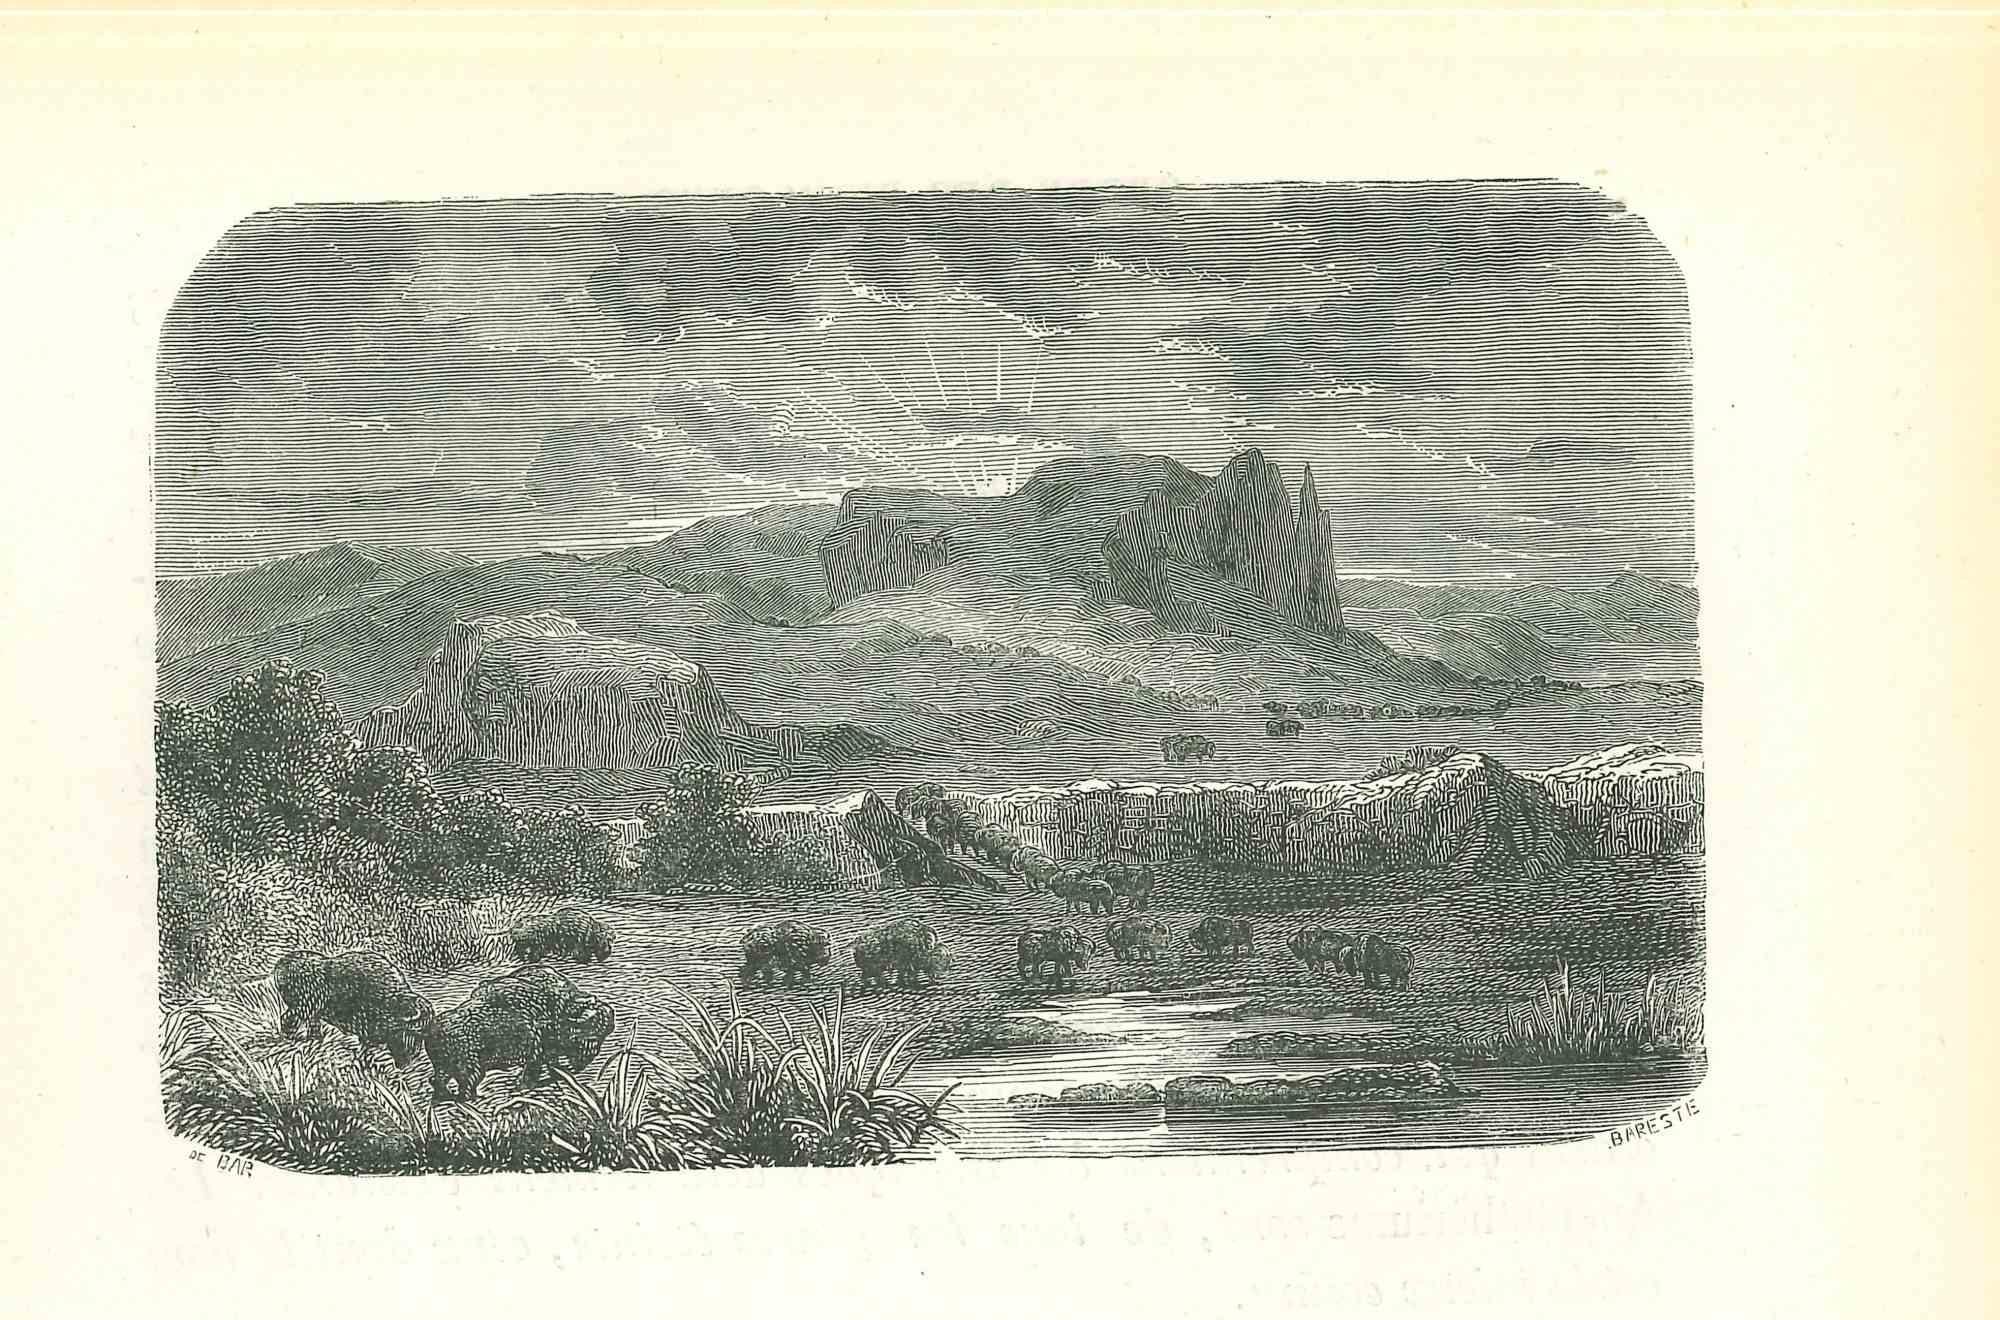 The Terrain is an original lithograph on ivory-colored paper, realized by Paul Gervais (1816-1879). The artwork is from The Series of "Les Trois Règnes de la Nature", and was published in 1854.

Good conditions.

With the notes on the rear.

The